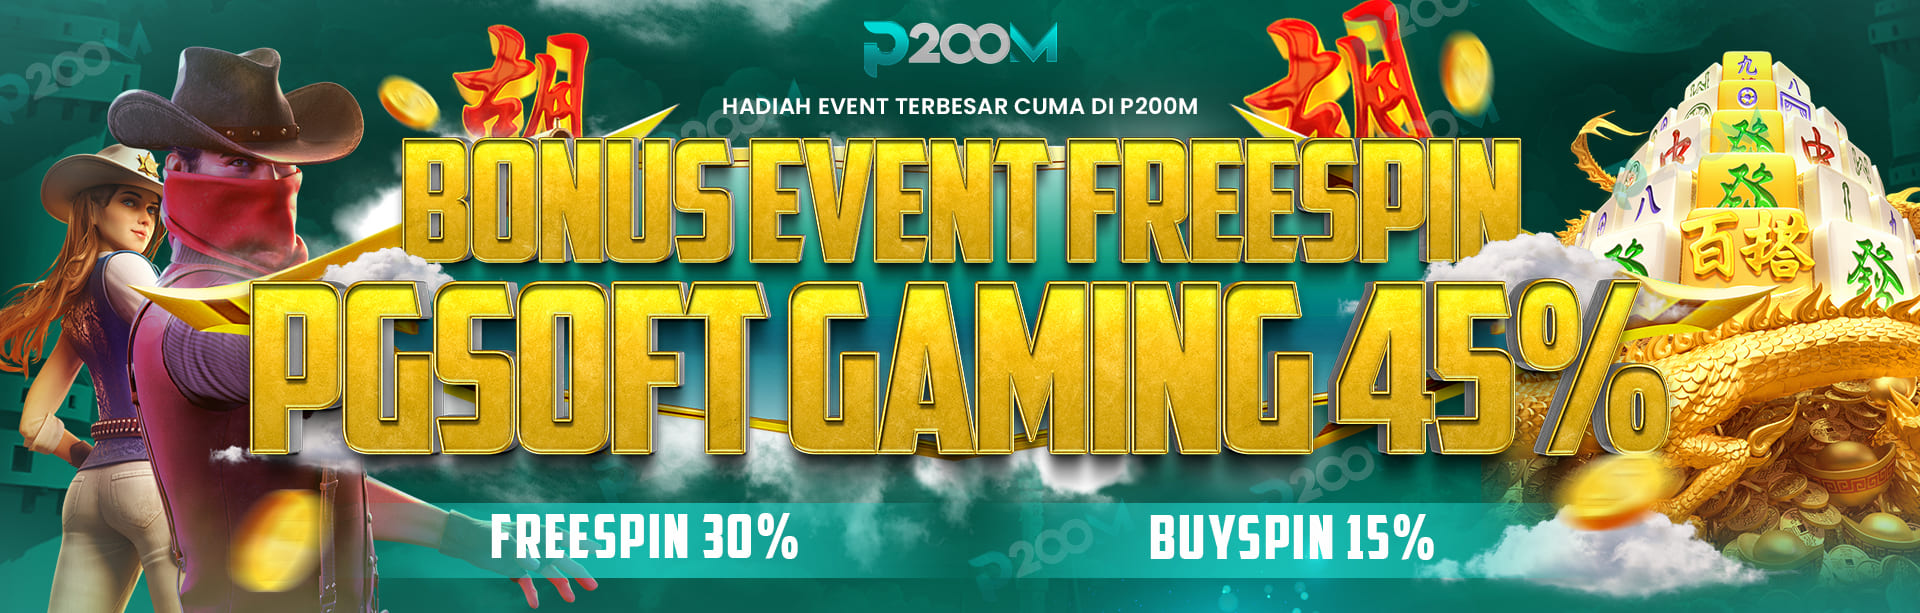 EVENT FREESPIN PG SOFT P200M